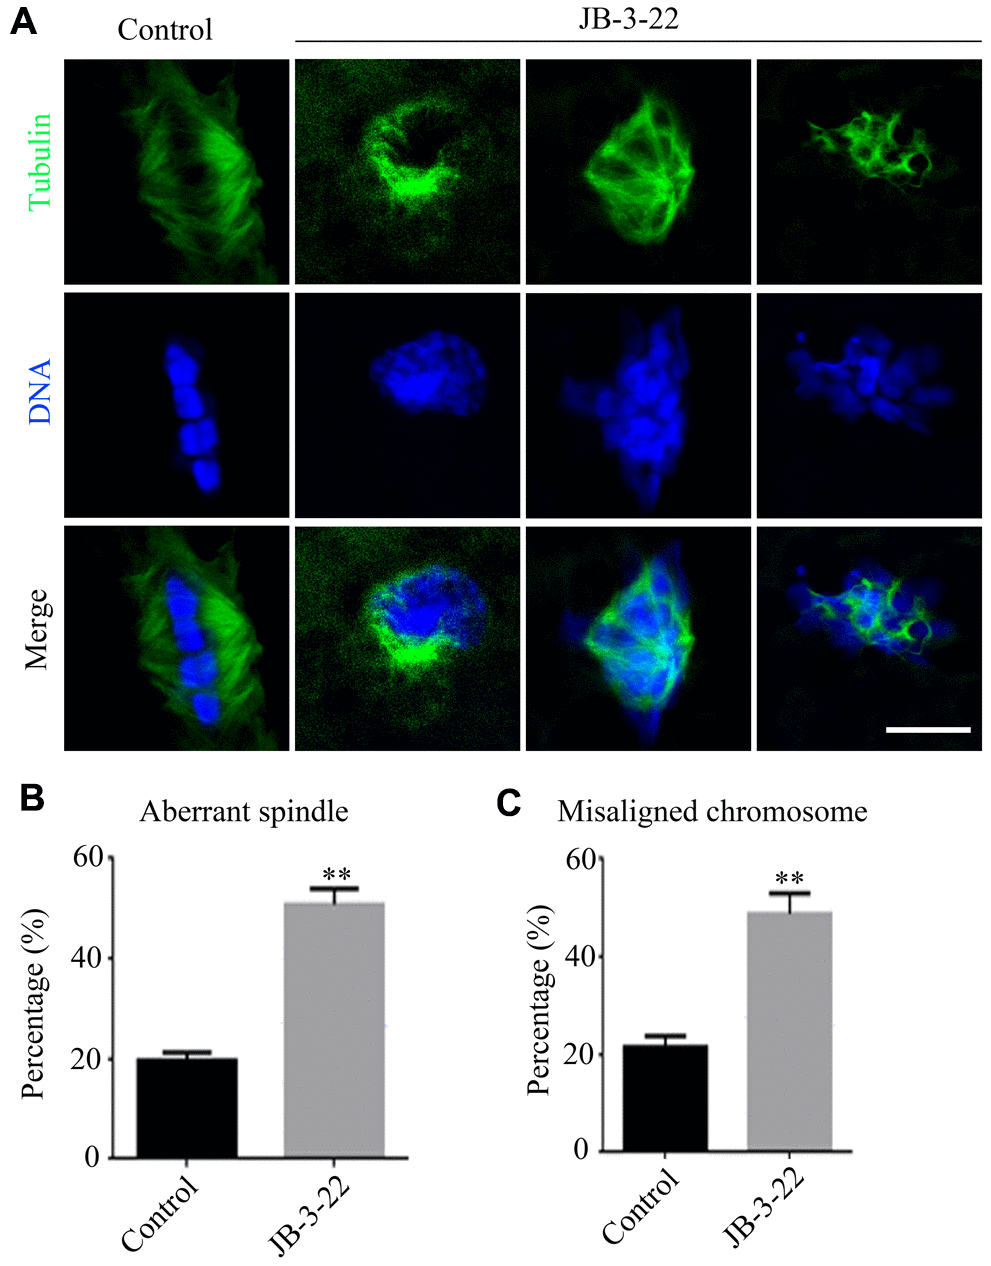 JB-3-22 treatment caused abnormal spindle assembly and misaligned chromosome in porcine oocytes. (A) Images of spindle morphologies and chromosome alignment in control and JB-3-22 treated oocytes, Scale bar, 5 μm. (B) The proportion of abnormal spindles was recorded in control and JB-3-22 treated oocytes. (C) The proportion of misaligned chromosomes was recorded in control and JB-3-22 treated oocytes. Data were presented as mean percentage (mean ± SEM) of at least three independent experiments. * P 